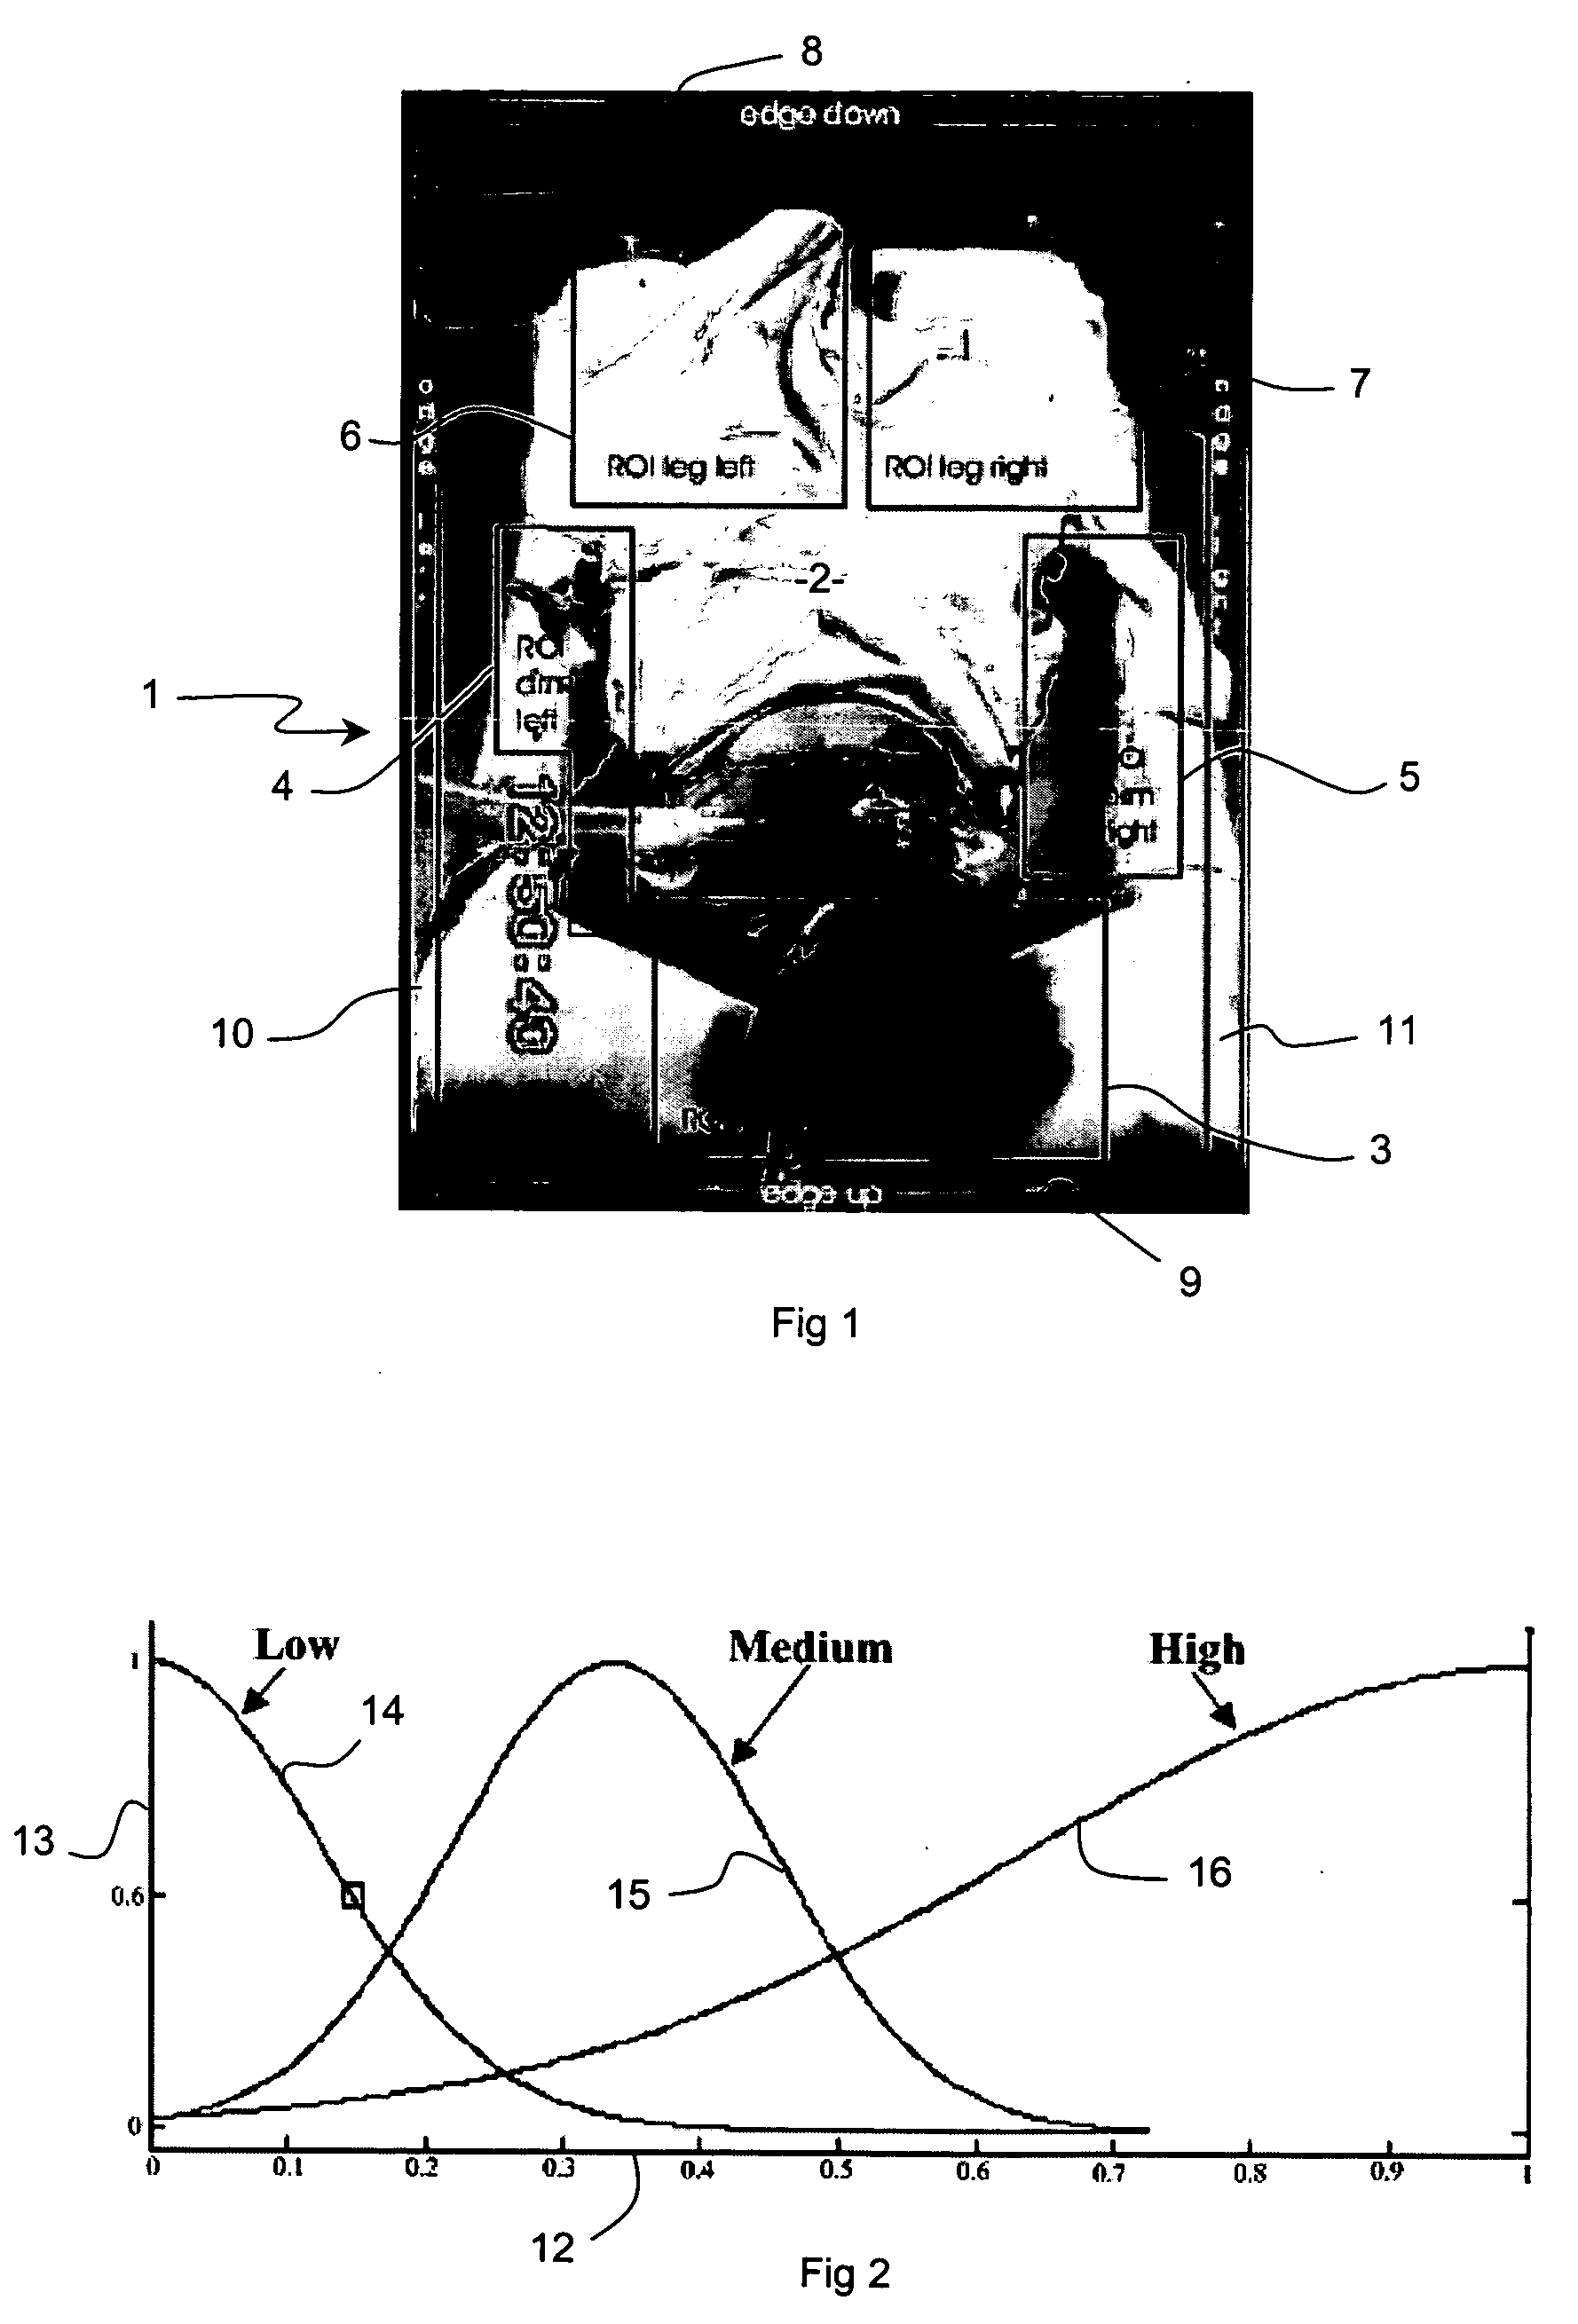 Method and system for assaying agitation